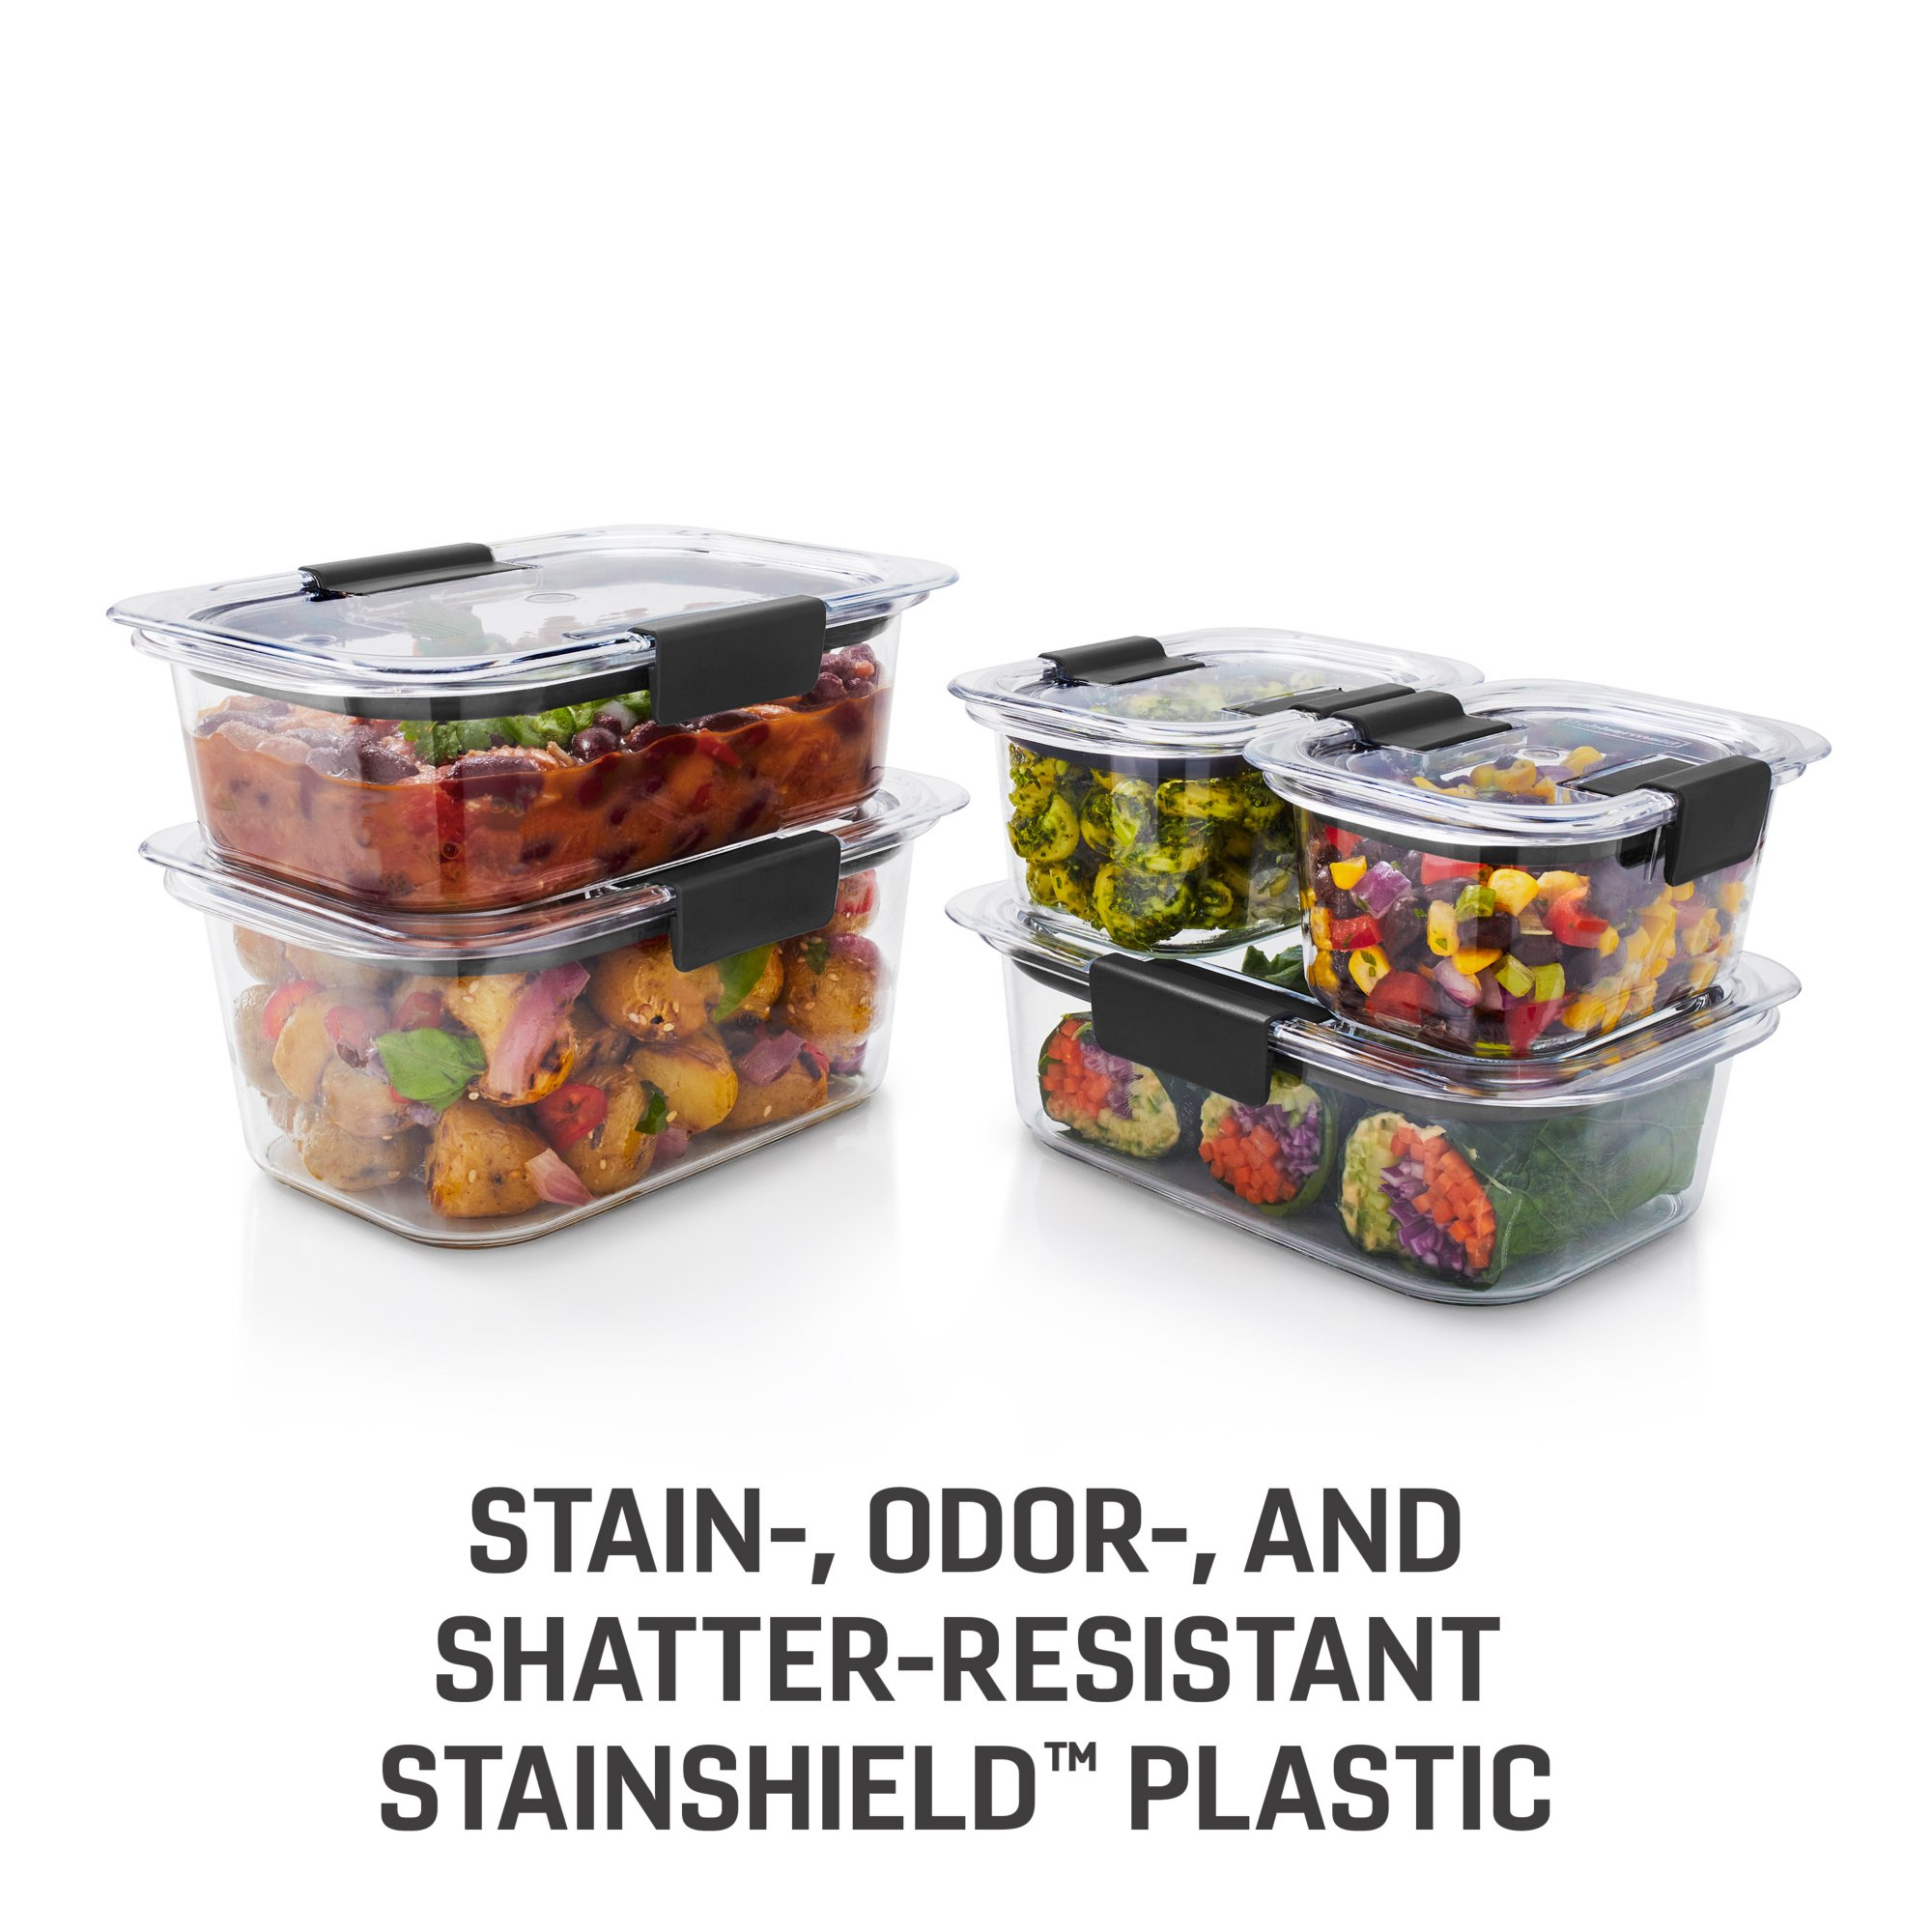 Rubbermaid Brilliance® 10-Piece Set, Leak-Proof and Clear Food